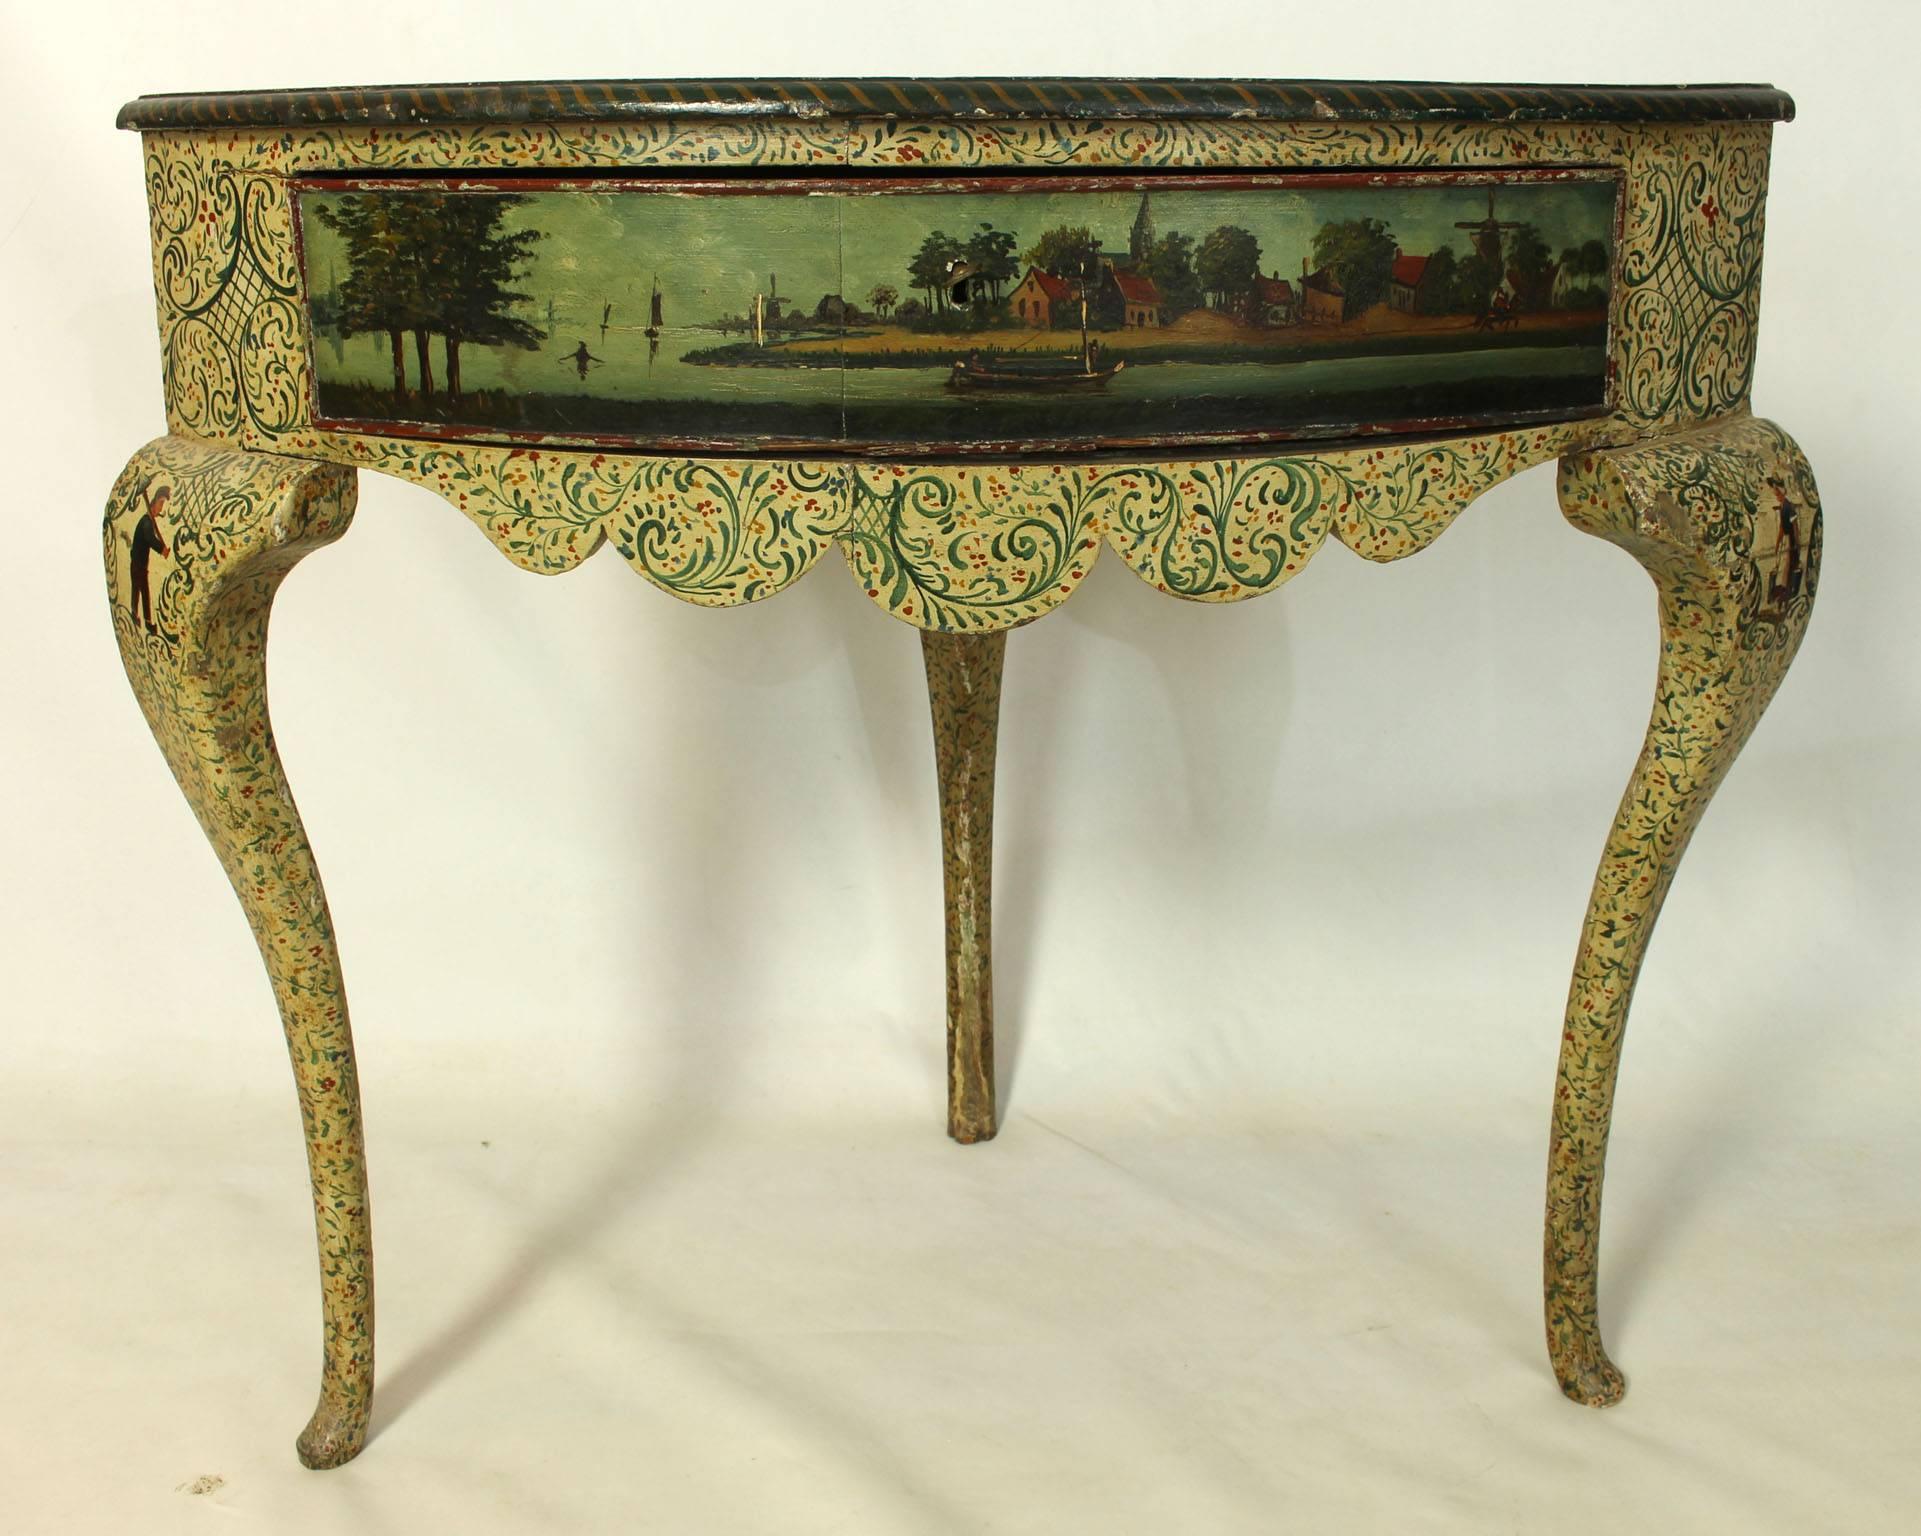 A charming early 19th century Continental paint decorated corner table supported by three graceful cabriole legs. The surface with trailing vines and flowers, village scenes with windmills and peasants wearing wooden shoes.